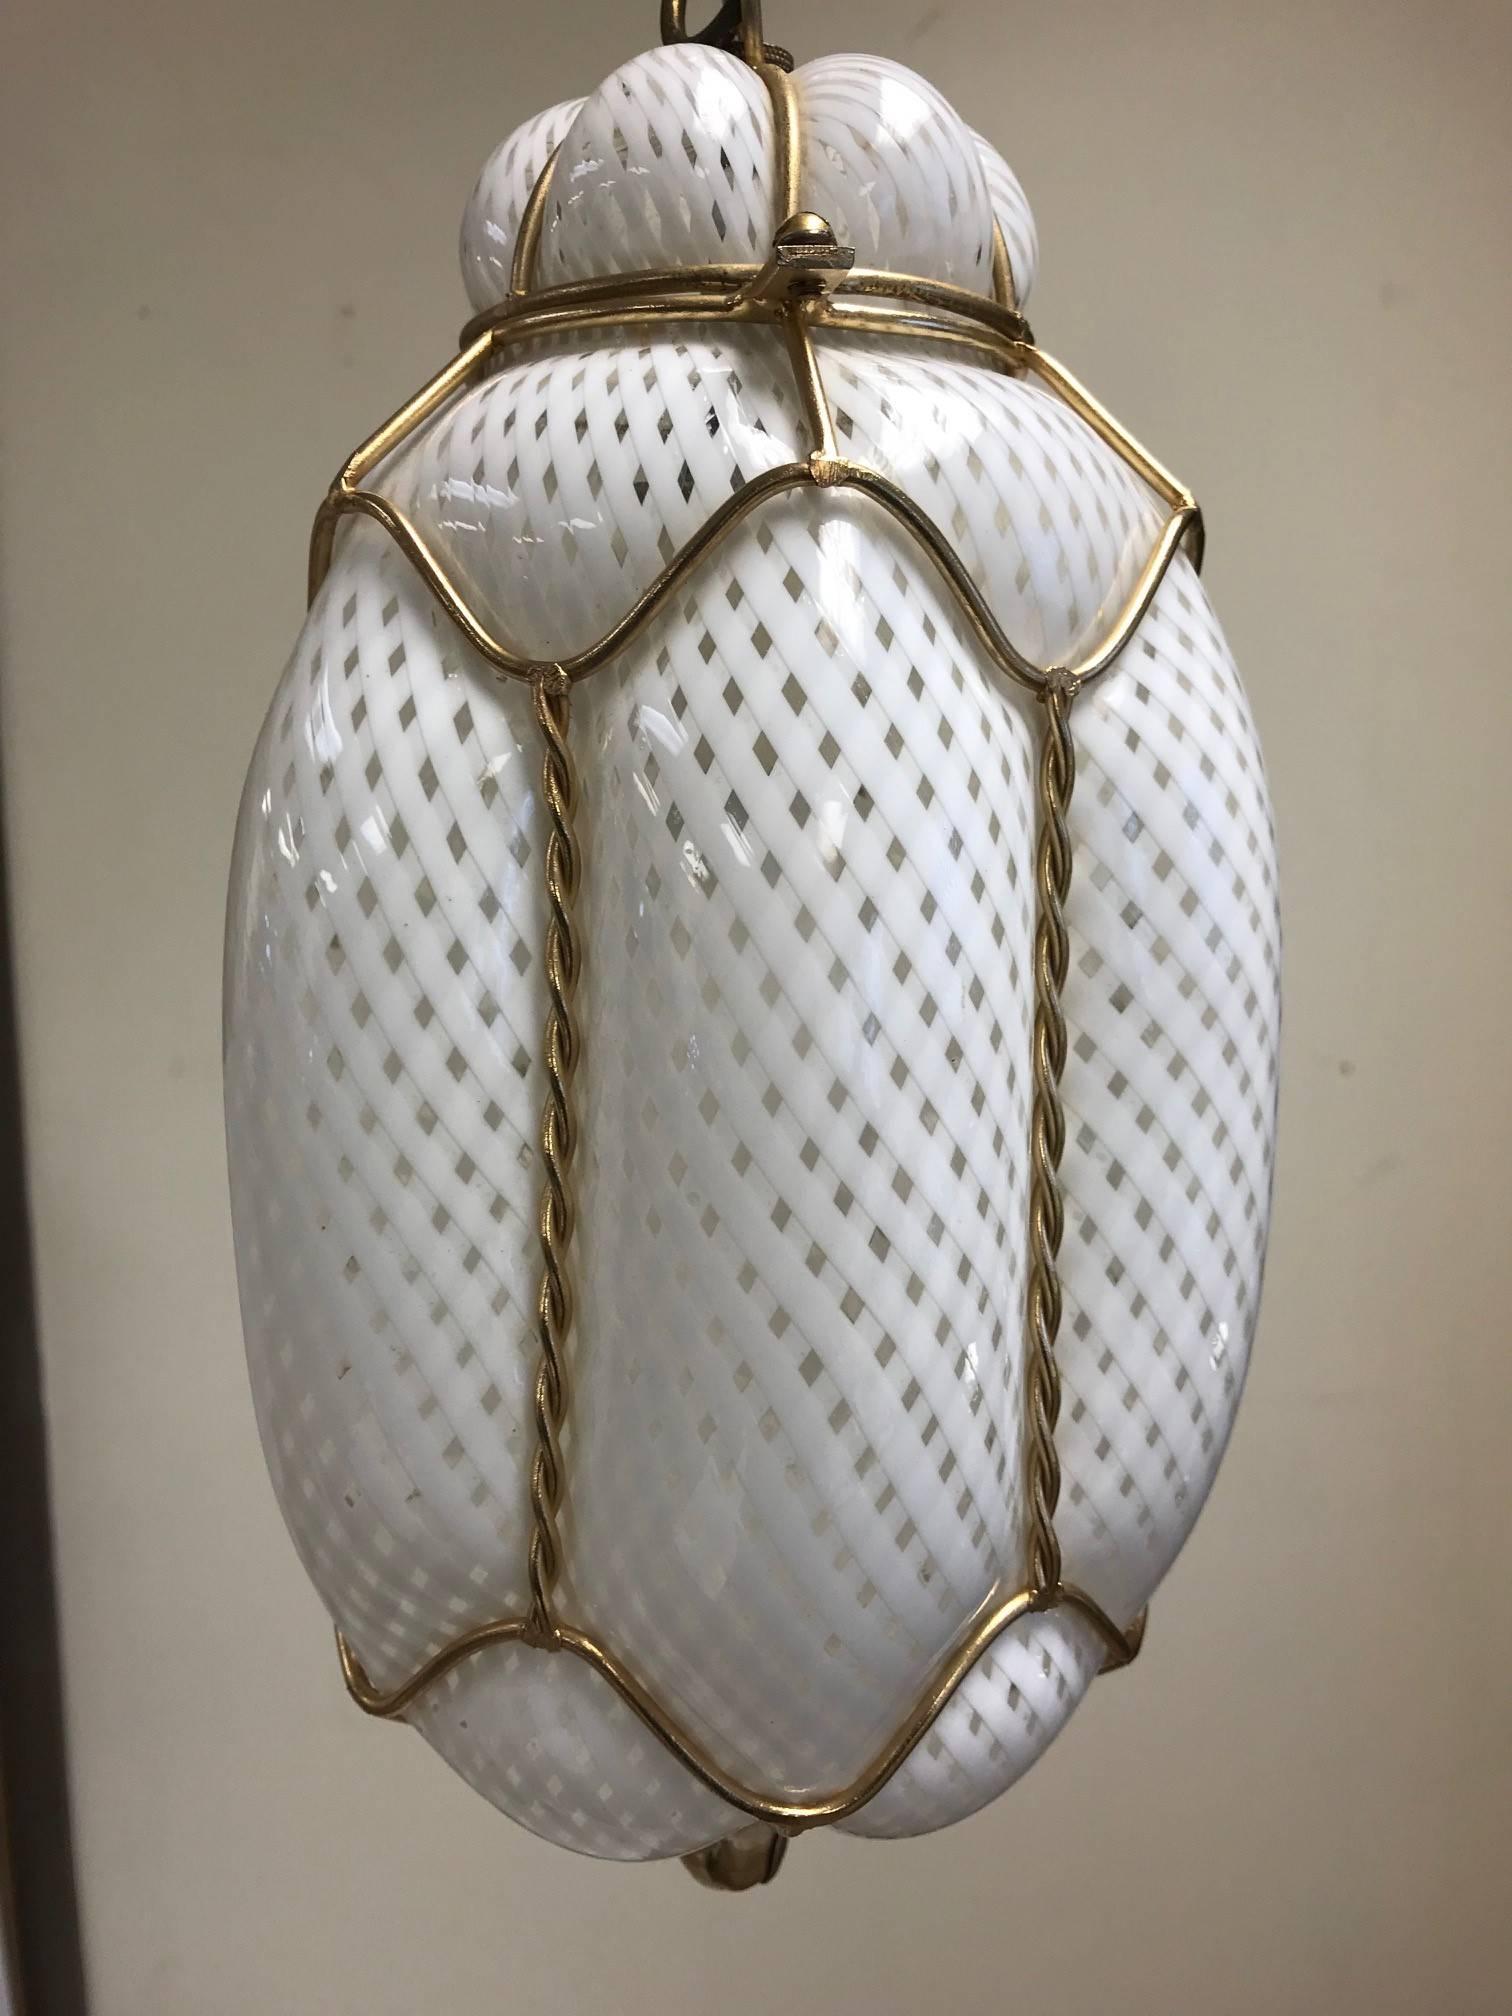 Seguso Murano handblown light pendant / fixture. White and clear Murano glass with a decorative brass cage trim. Style of Dino Martens.
Measures: 36H (includes pendant and chain). Murano pendant itself: 13 H x 7 W.